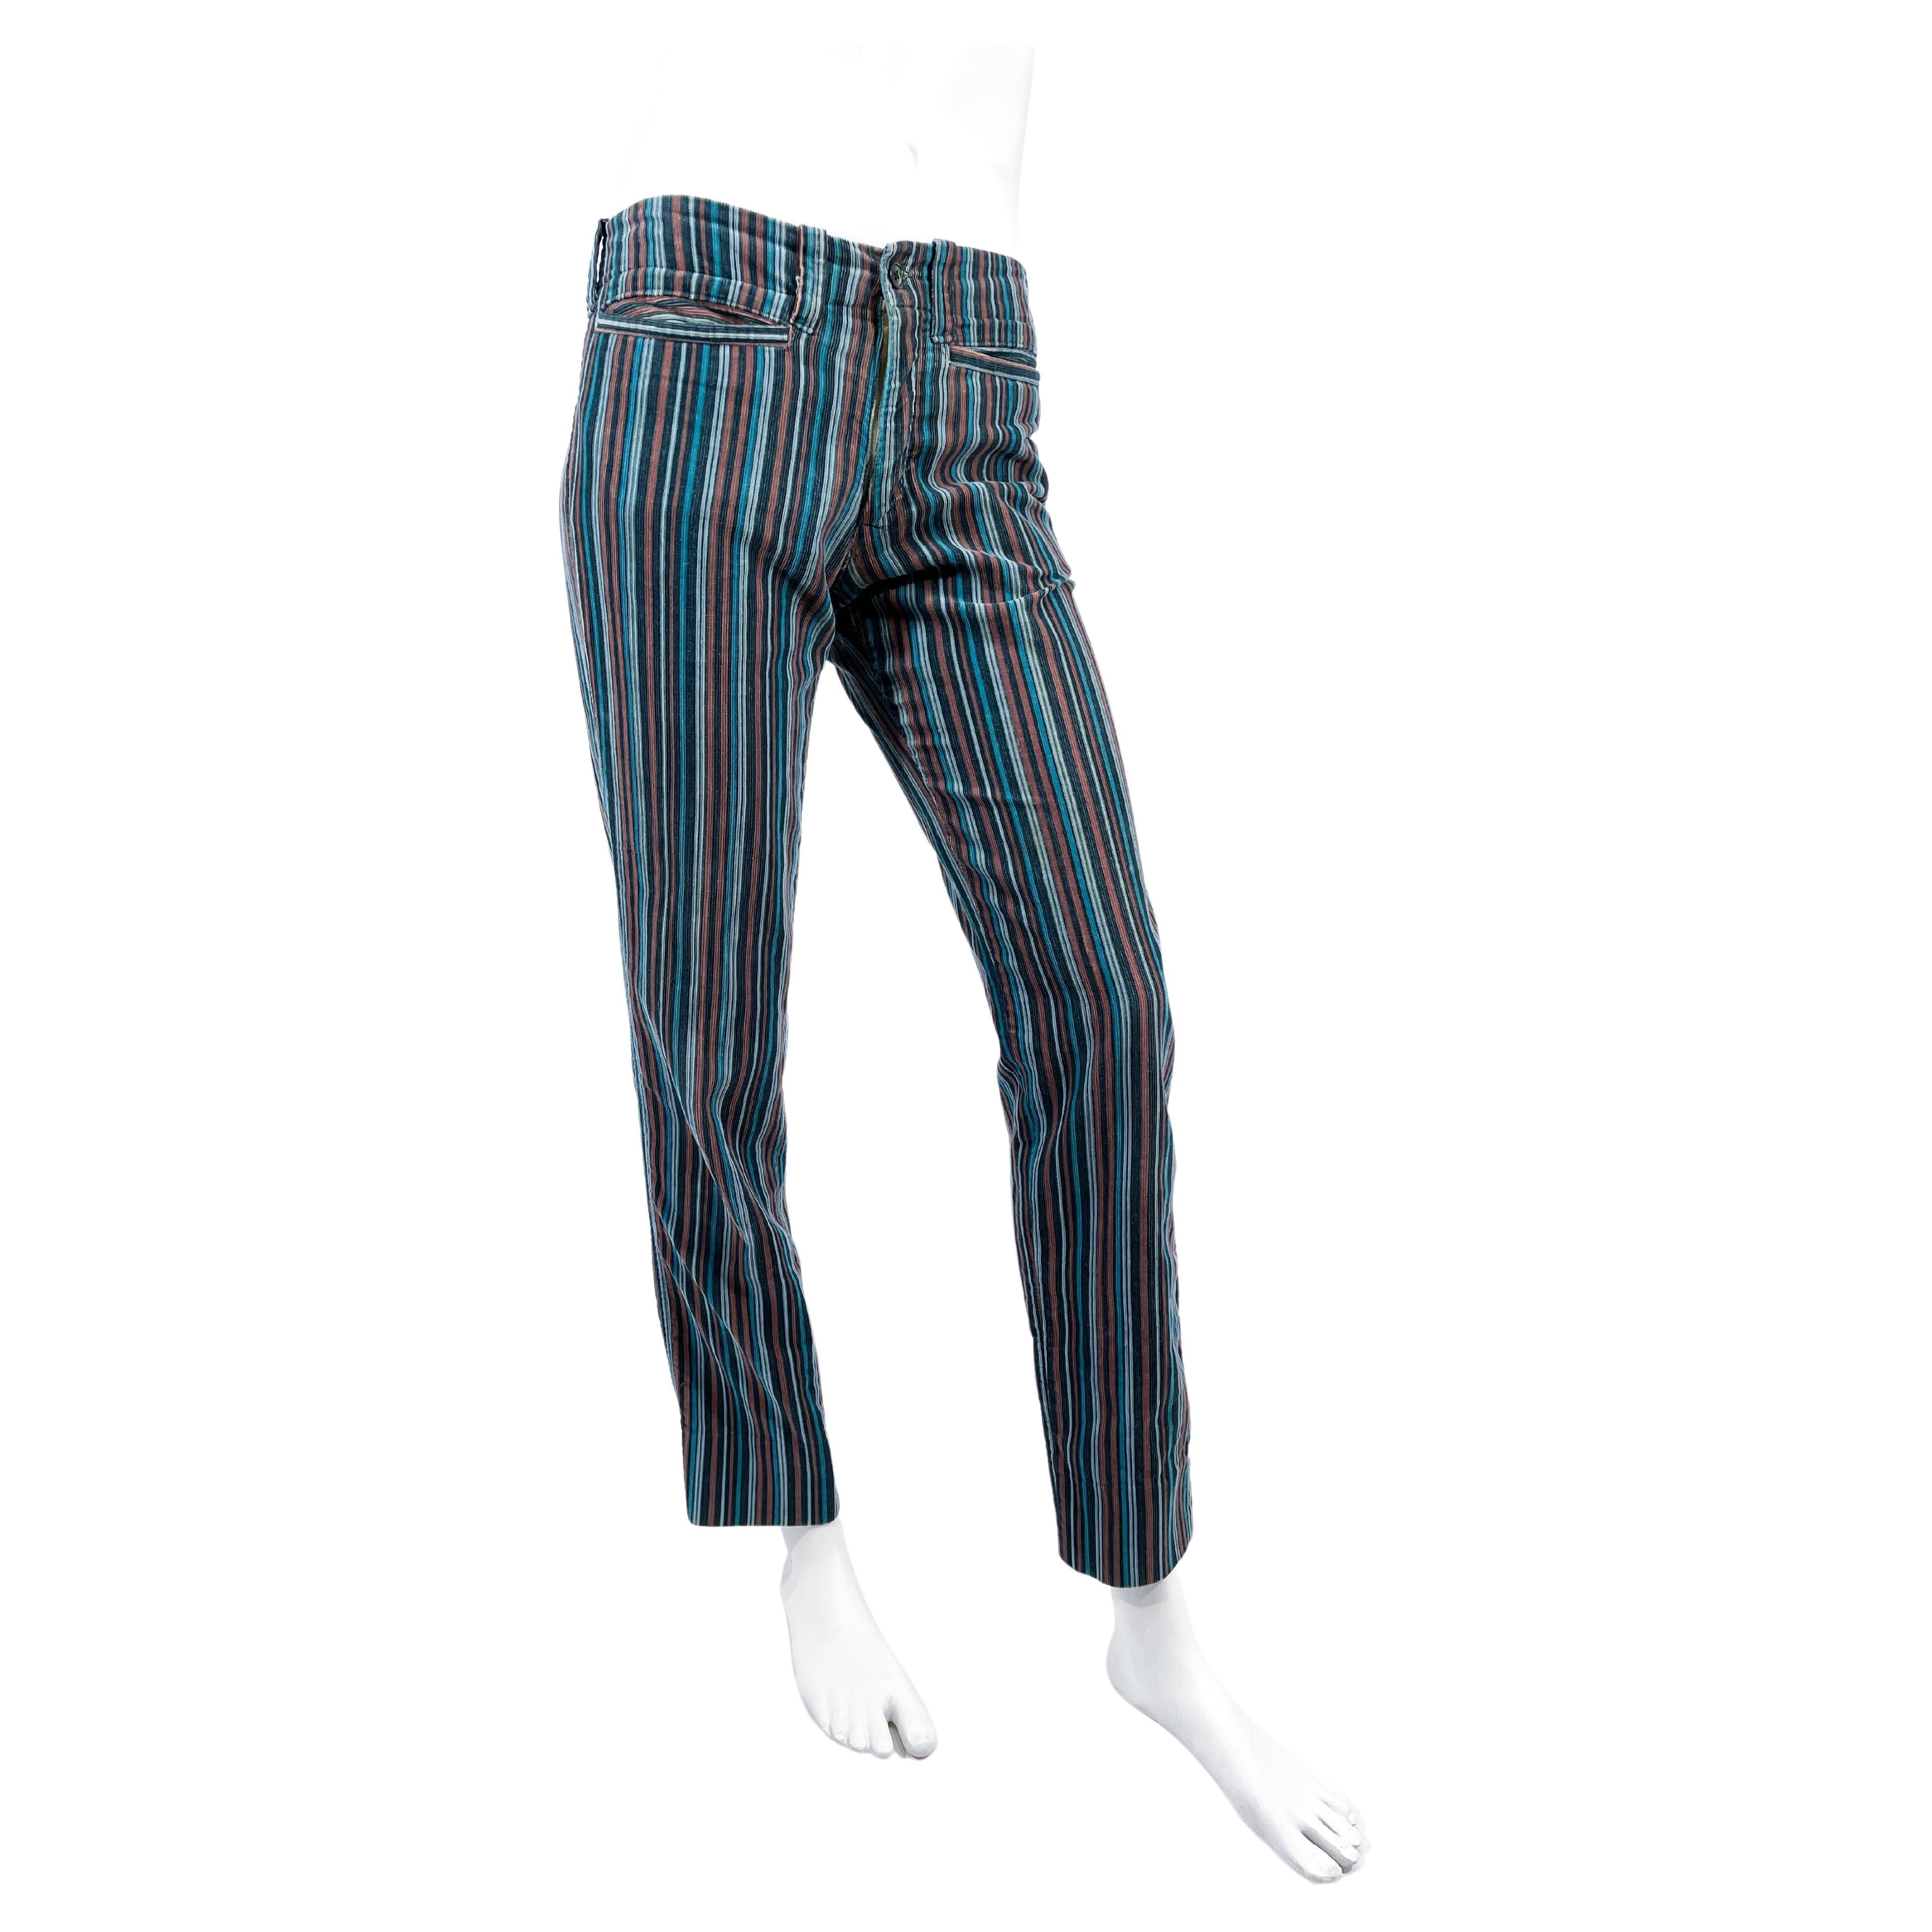 1979 Andrew Yiannakou Corduroy Stripped Pants    For Sale